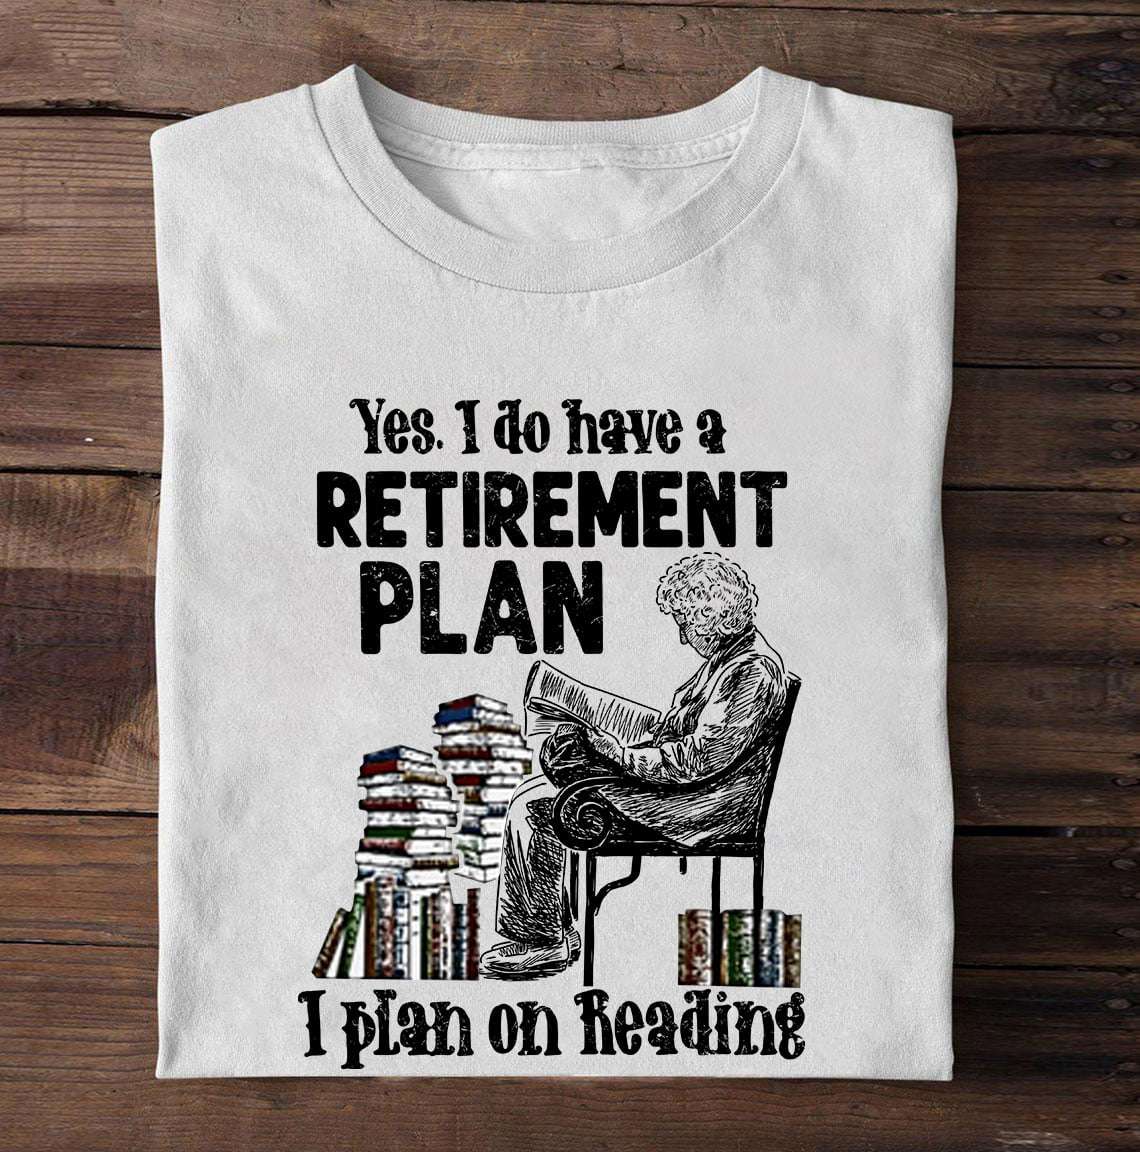 Yes I do have a retirement plan I plan on reading - Old man reading books, gift for book person